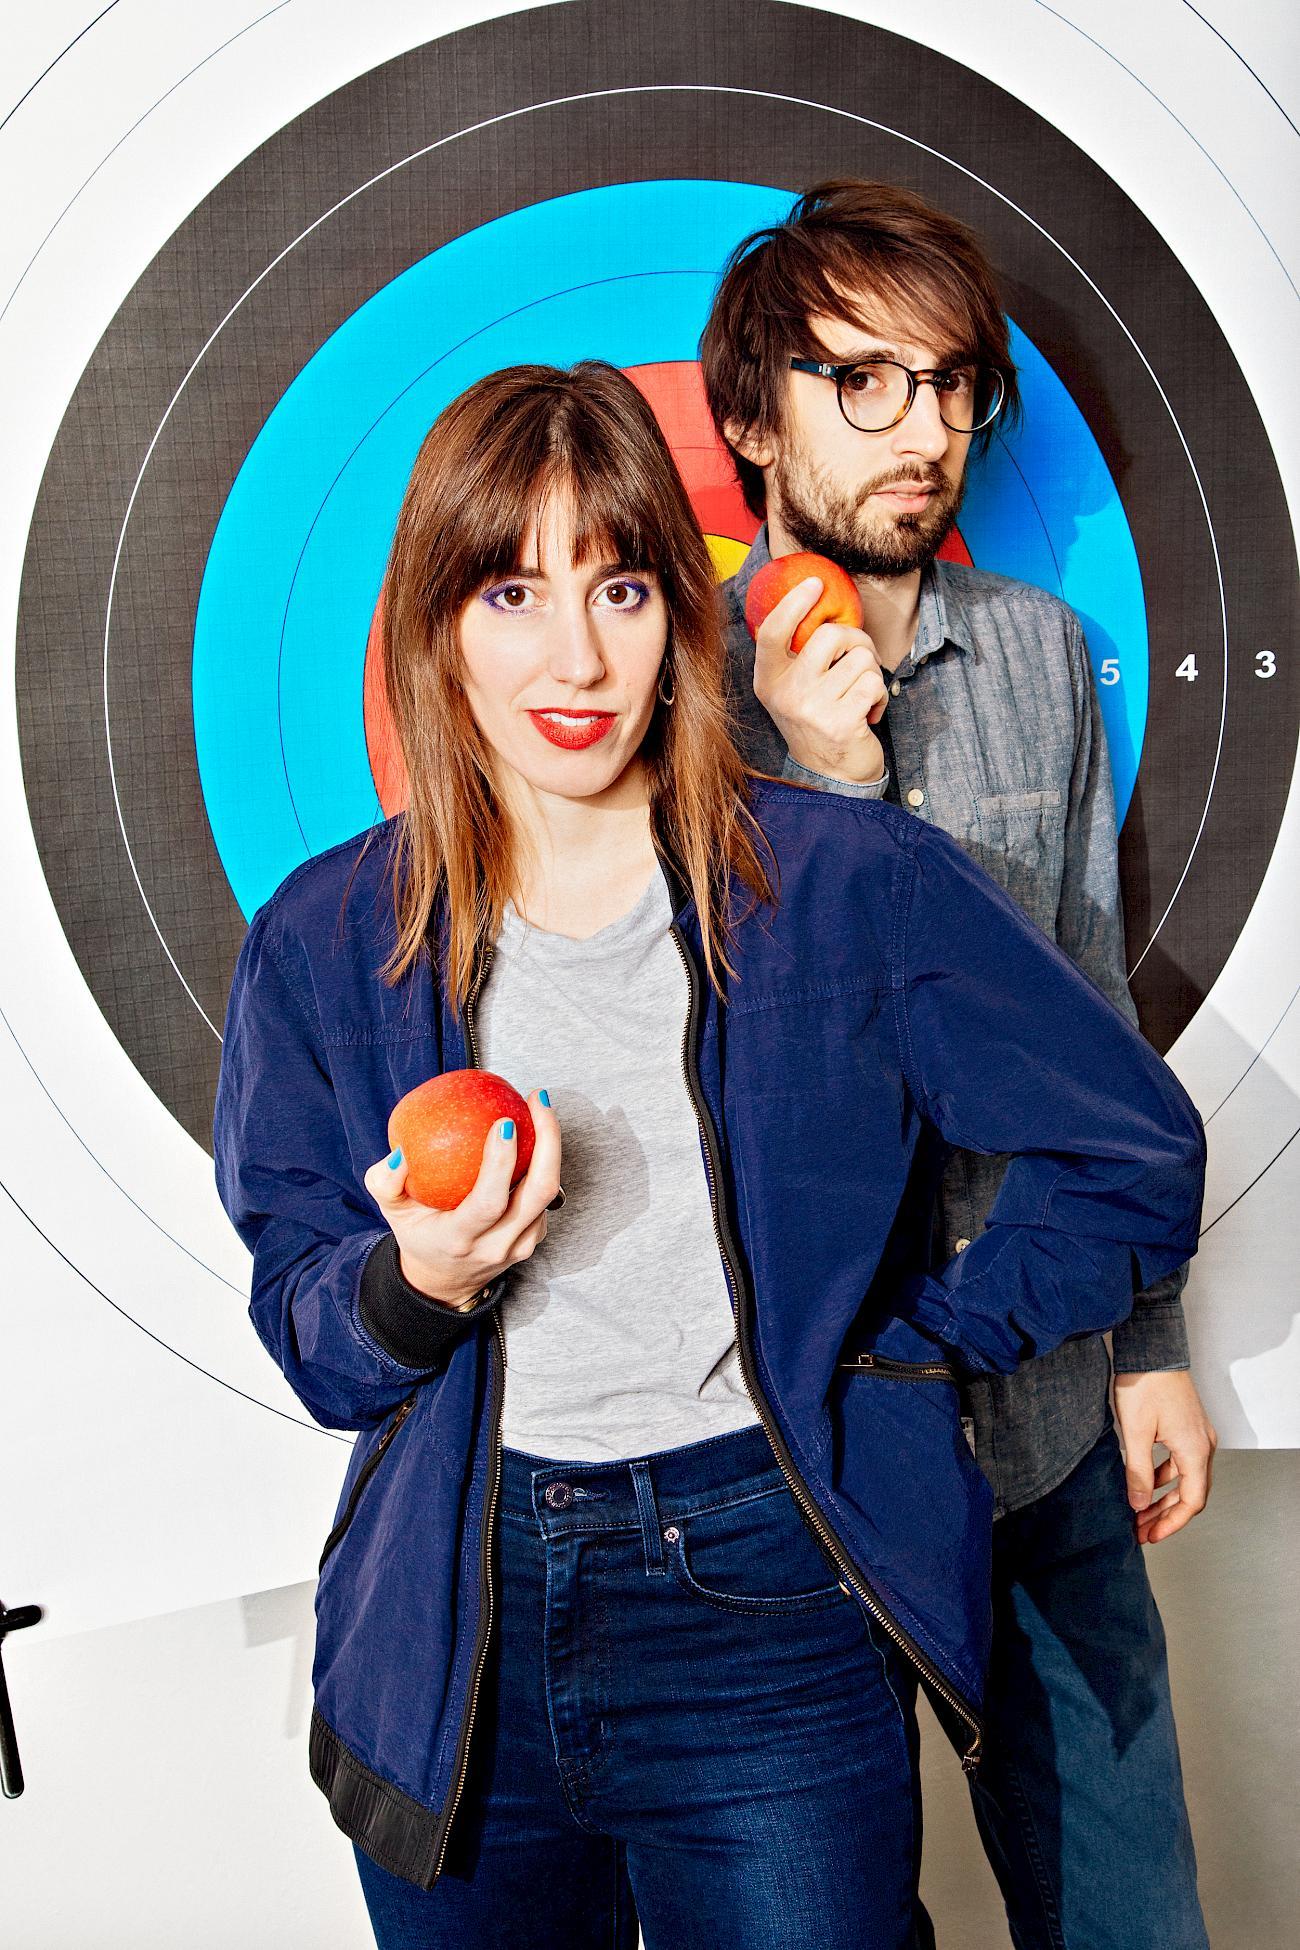 Maya & Daniele in front of an archery target holding an apple